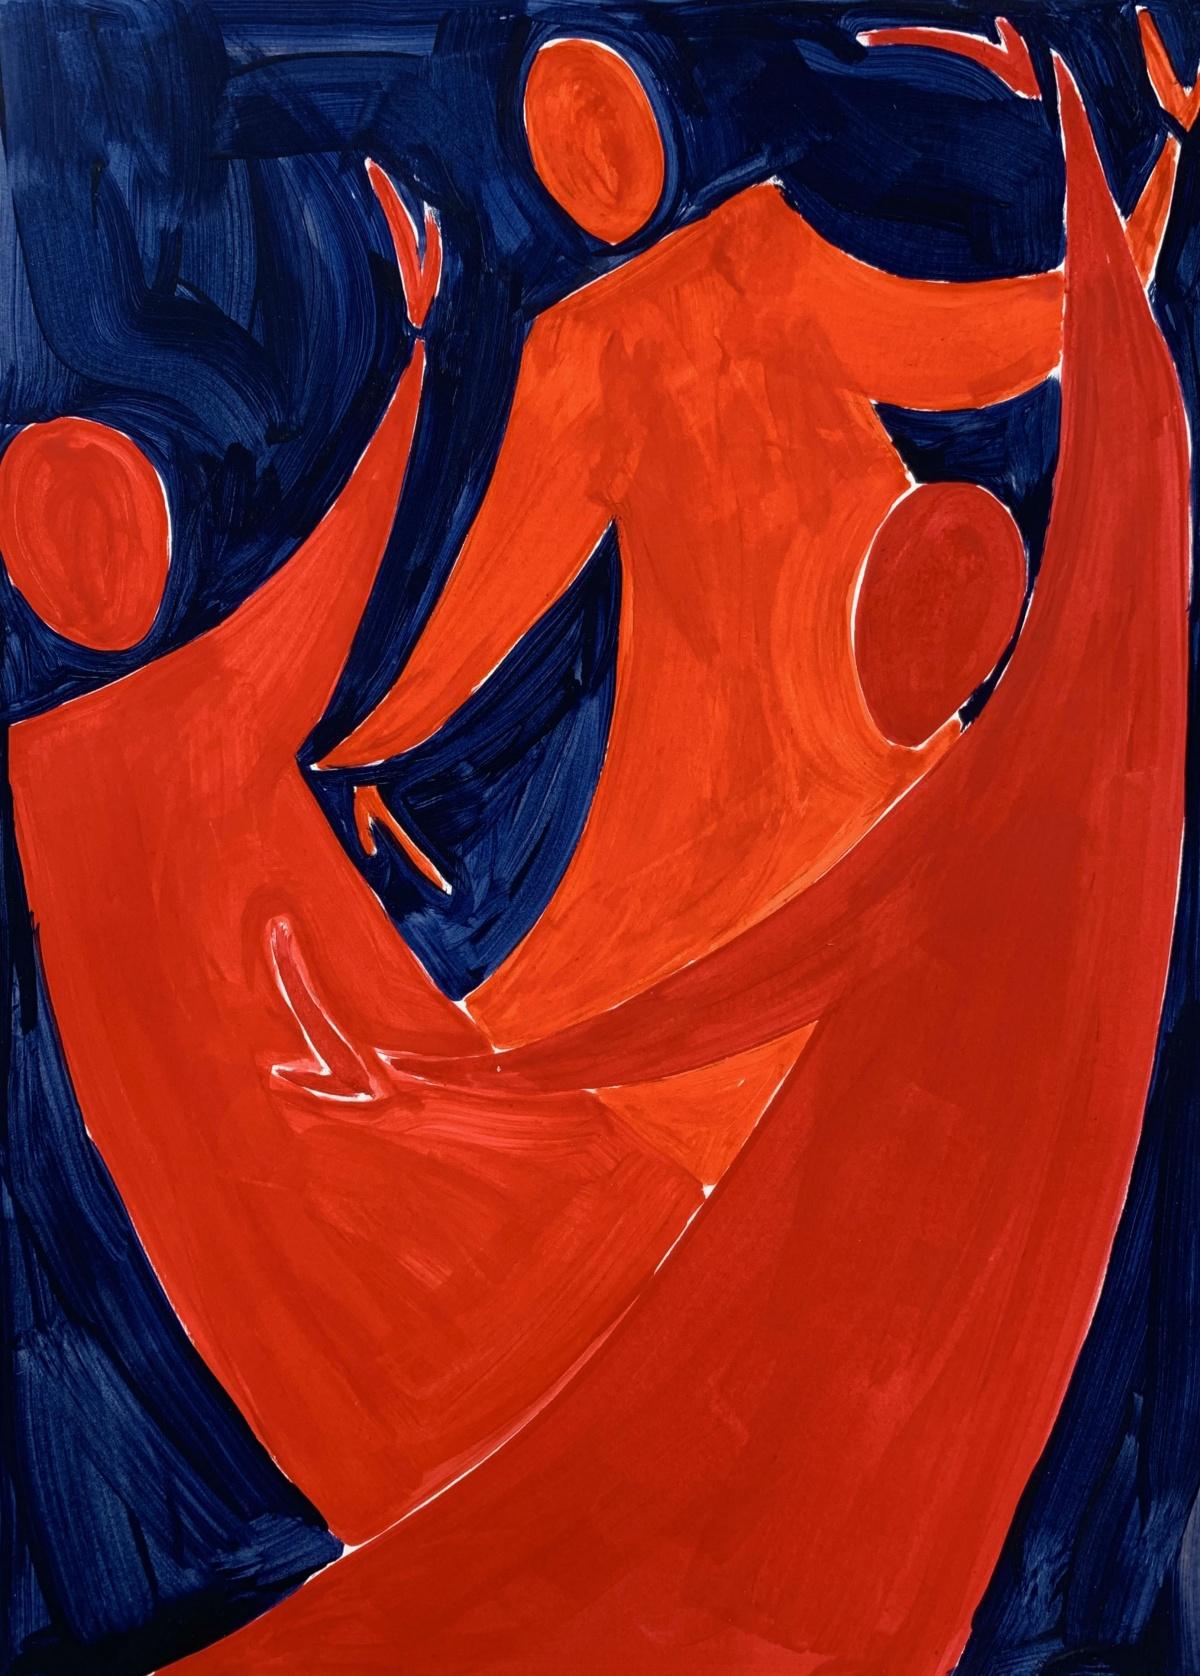 Waleria Matelska Abstract Painting - A dance - Figurative Painting on Paper, Young art, Colorful, Vibrant